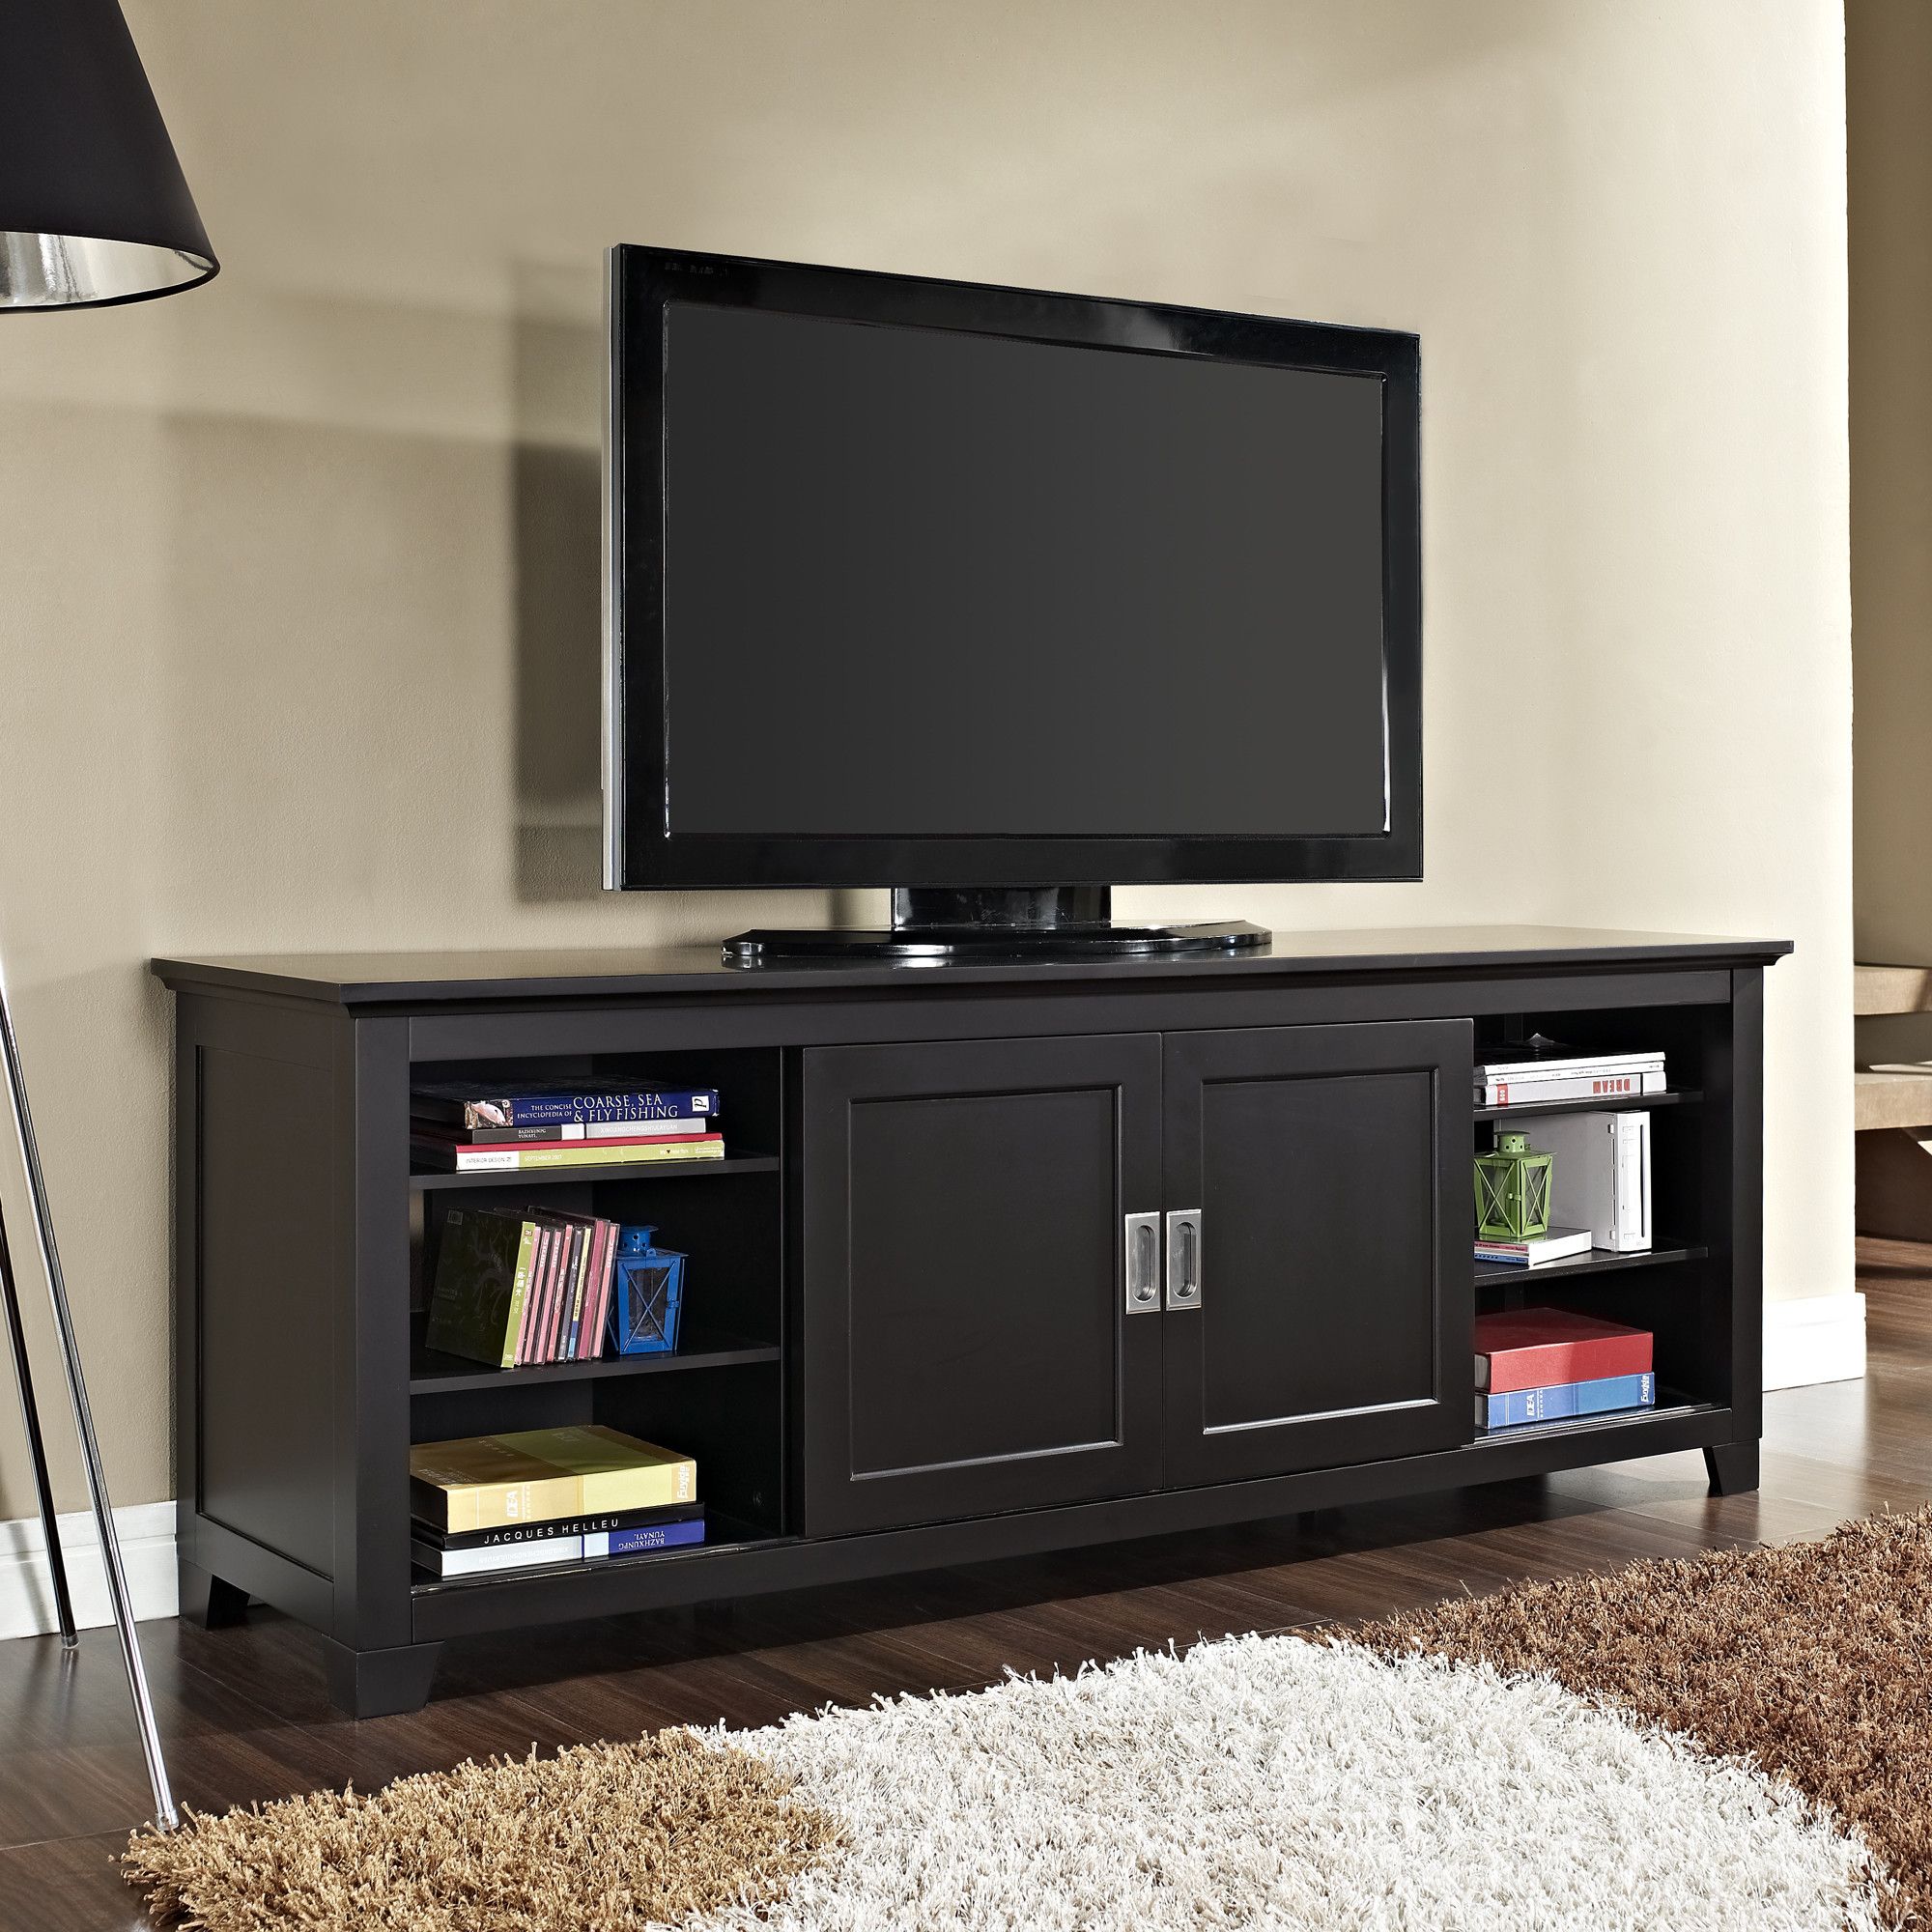 Wooden Sliding Tv Stand | Keko Furniture In Wooden Tv Stands (Photo 15 of 15)